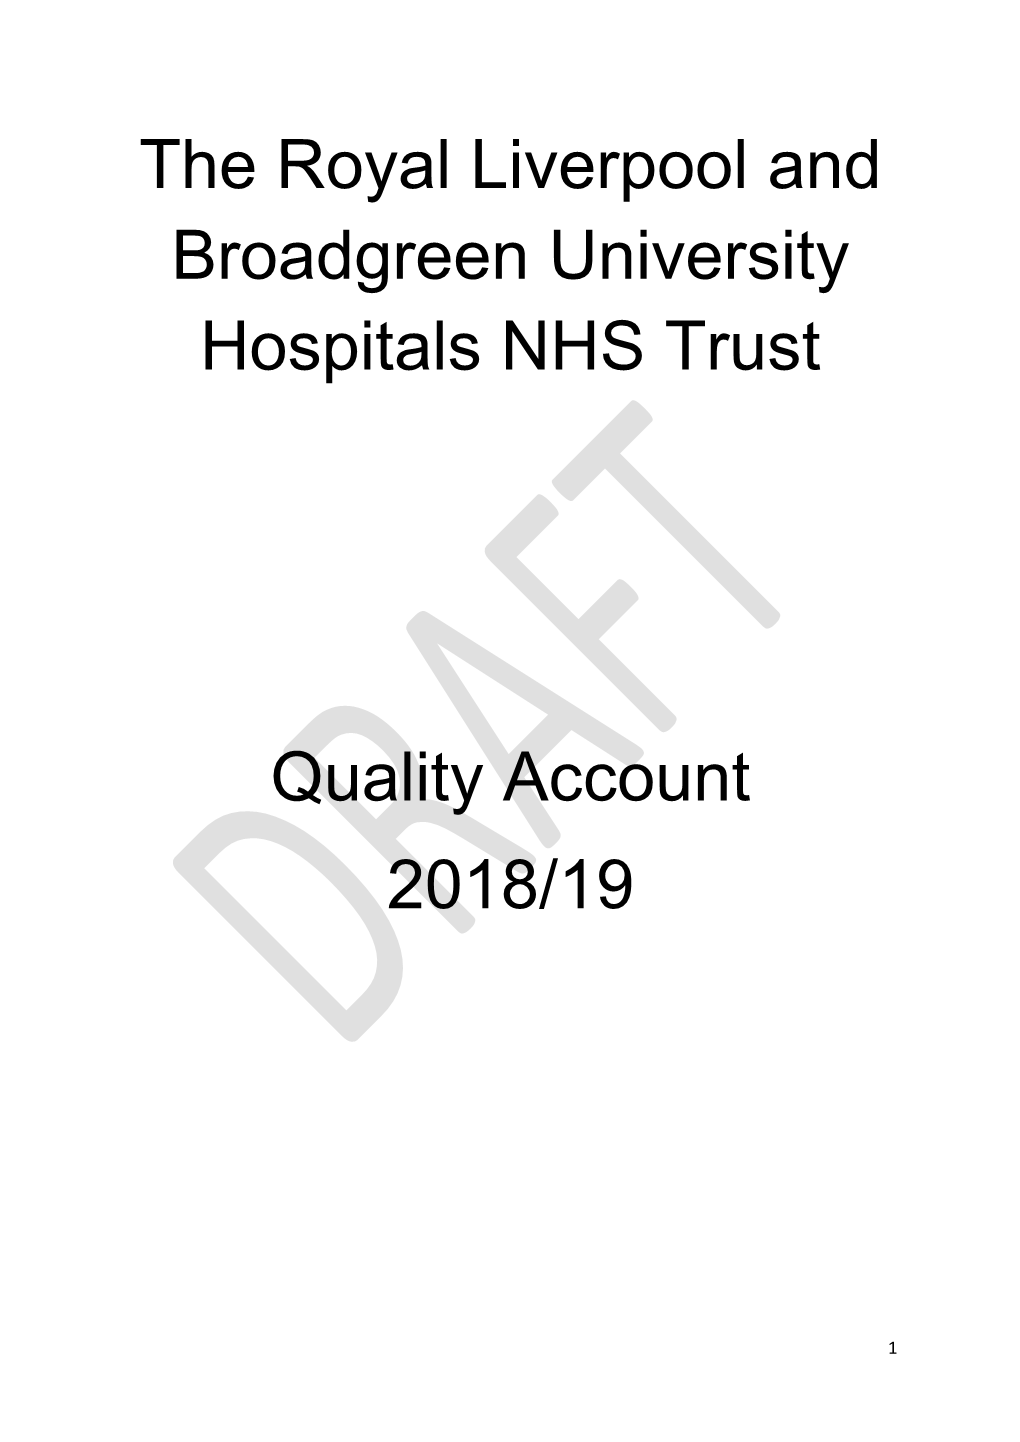 The Royal Liverpool and Broadgreen University Hospitals NHS Trust